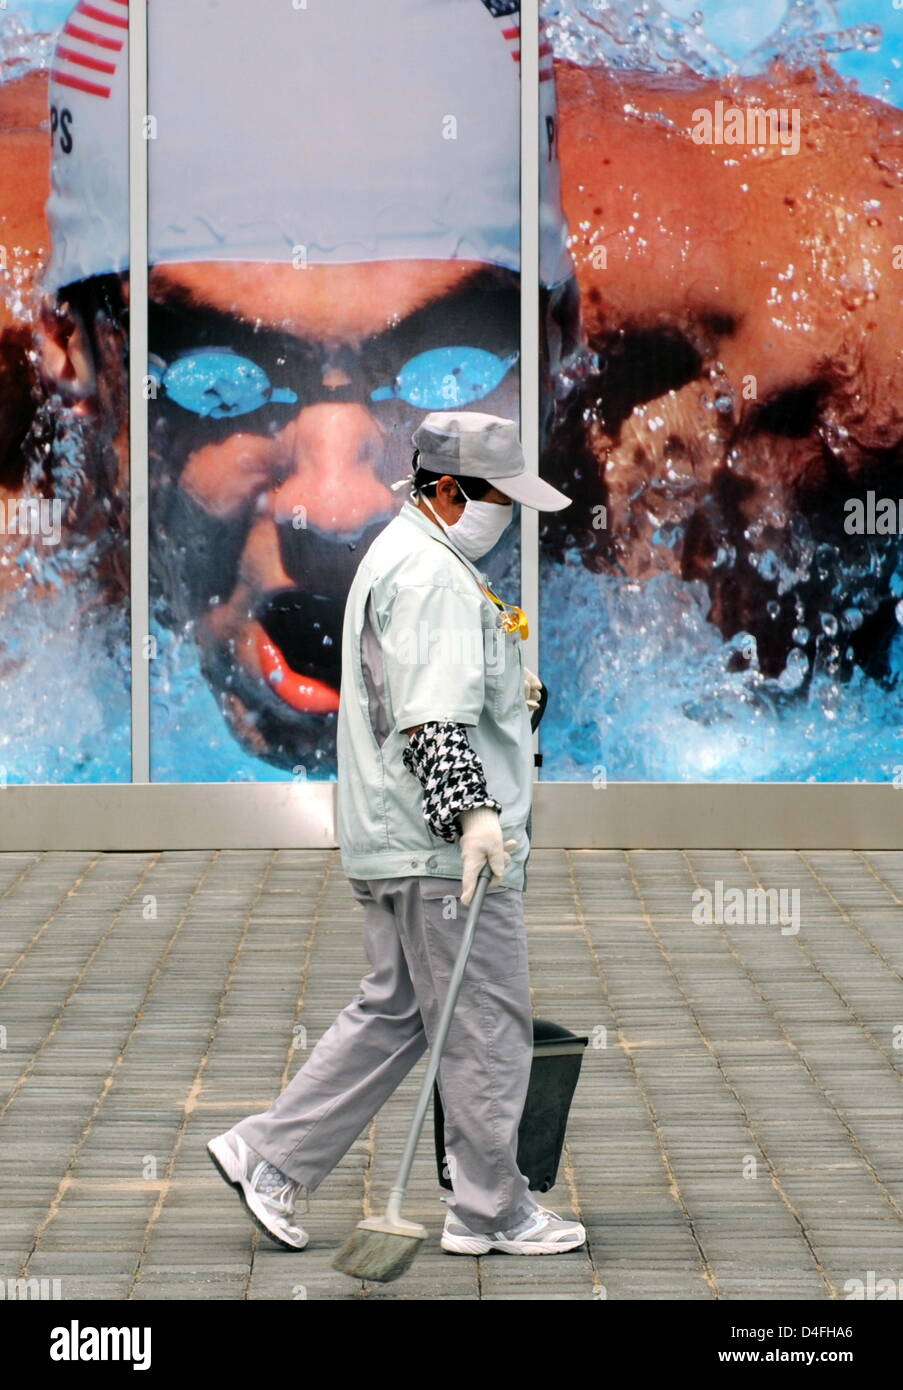 A sweeper with a pollution mask passes an advertising picture of US swimmer Michael Phelps prior to the 2008 Olympic Games, Beijing, China, 07 August 2008. Photo: Bernd Thissen ###dpa### Stock Photo